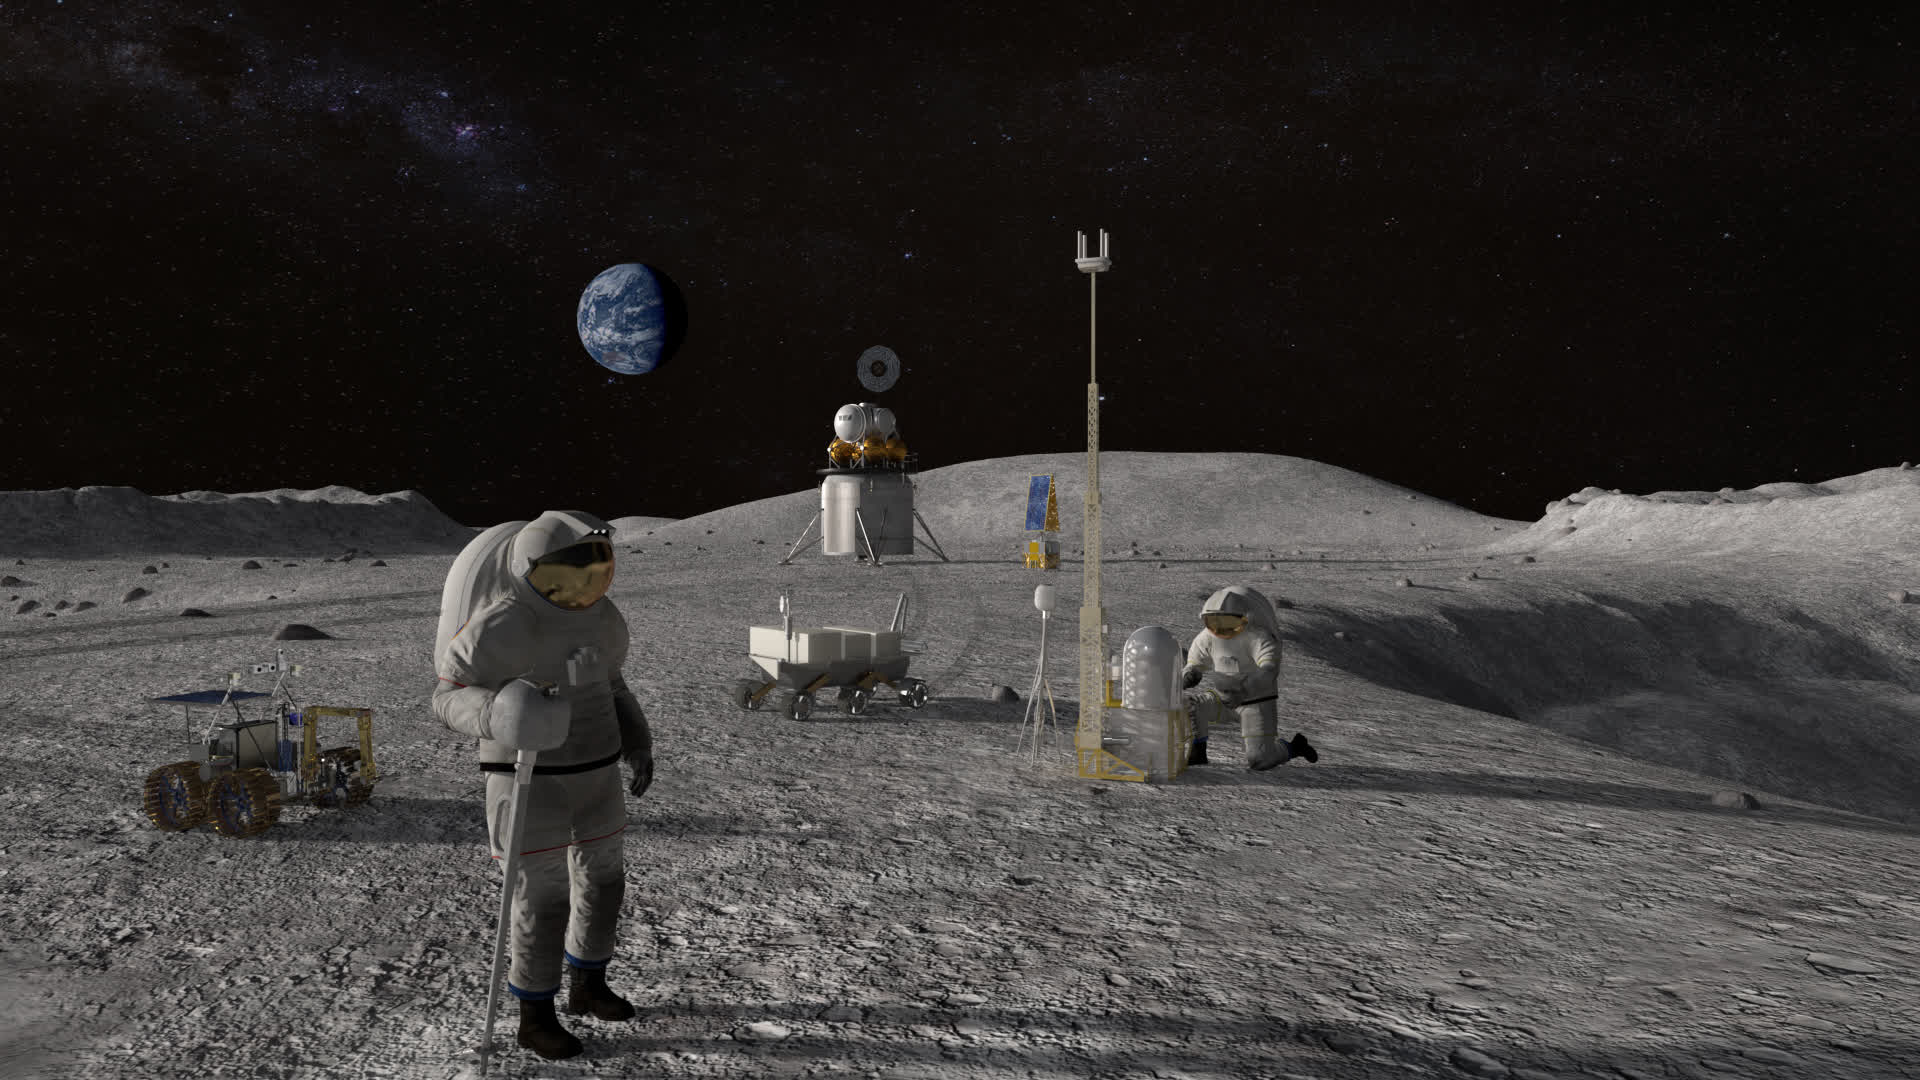 SiFive RISC-V cores and Microchip processors will power NASA's future space missions